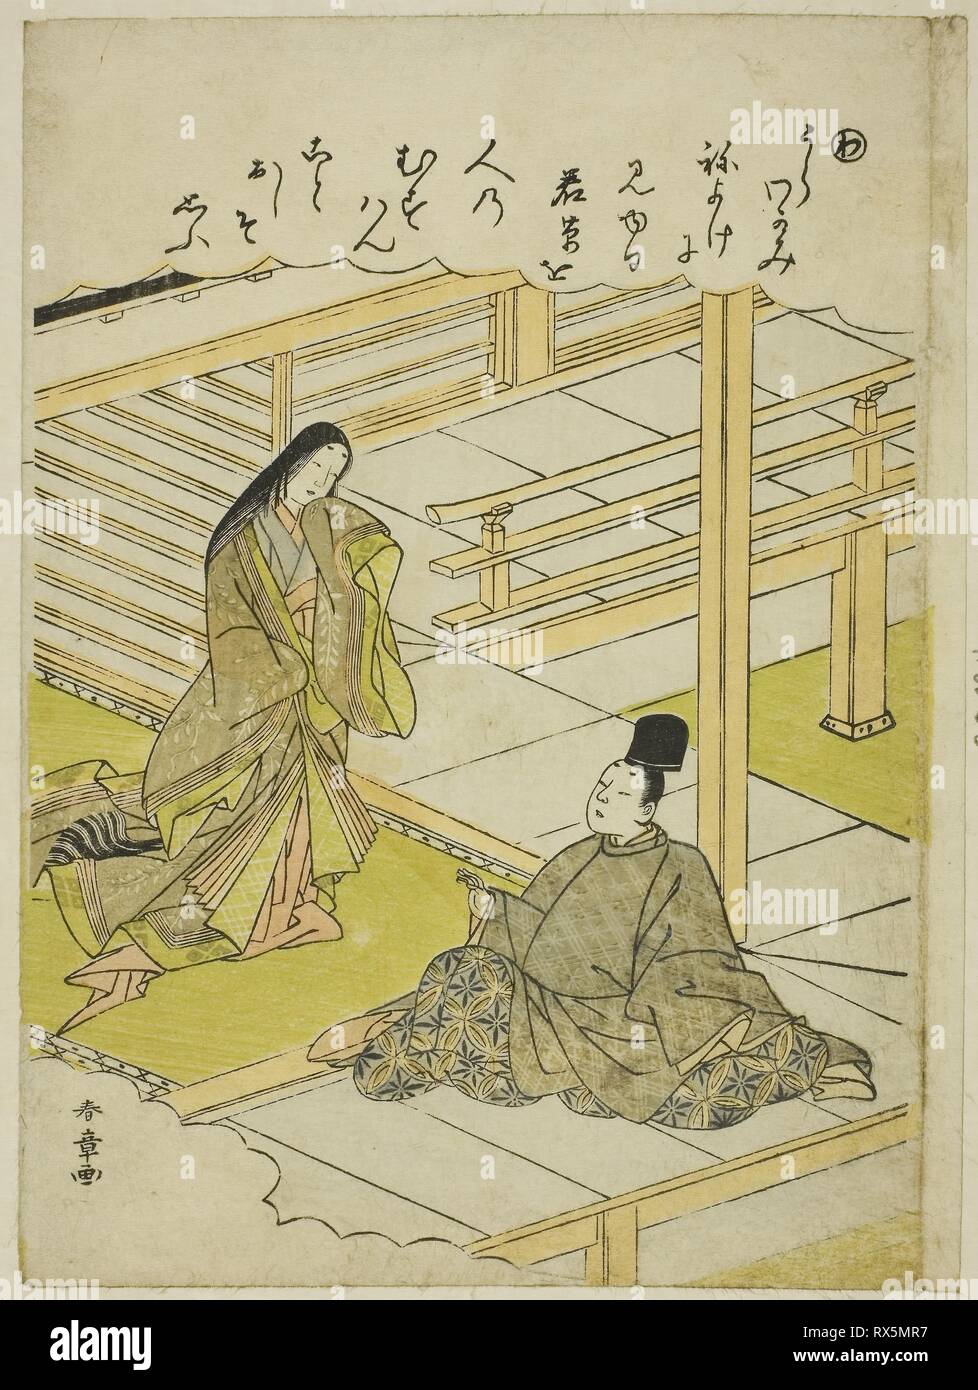 "Wa": Young Grass, from the series "Tales of Ise in Fashionable Brocade Pictures (Furyu nishiki-e Ise monogatari)". Katsukawa Shunsho ?? ??; Japanese, 1726-1792. Date: 1767-1778. Dimensions: 9 x 6 1/4 in. Color woodblock print; koban. Origin: Japan. Museum: The Chicago Art Institute. Stock Photo